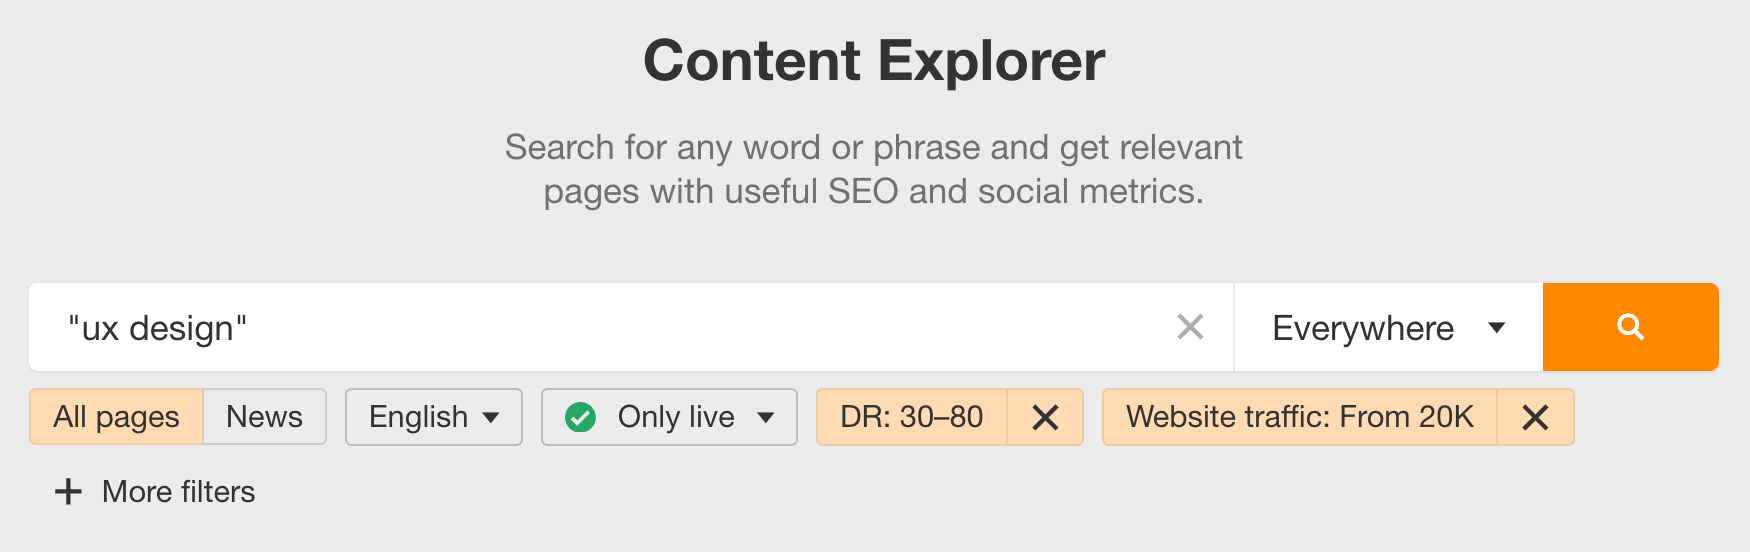 Setting up Ahrefs' Content Explorer to find guest blogging opportunities.